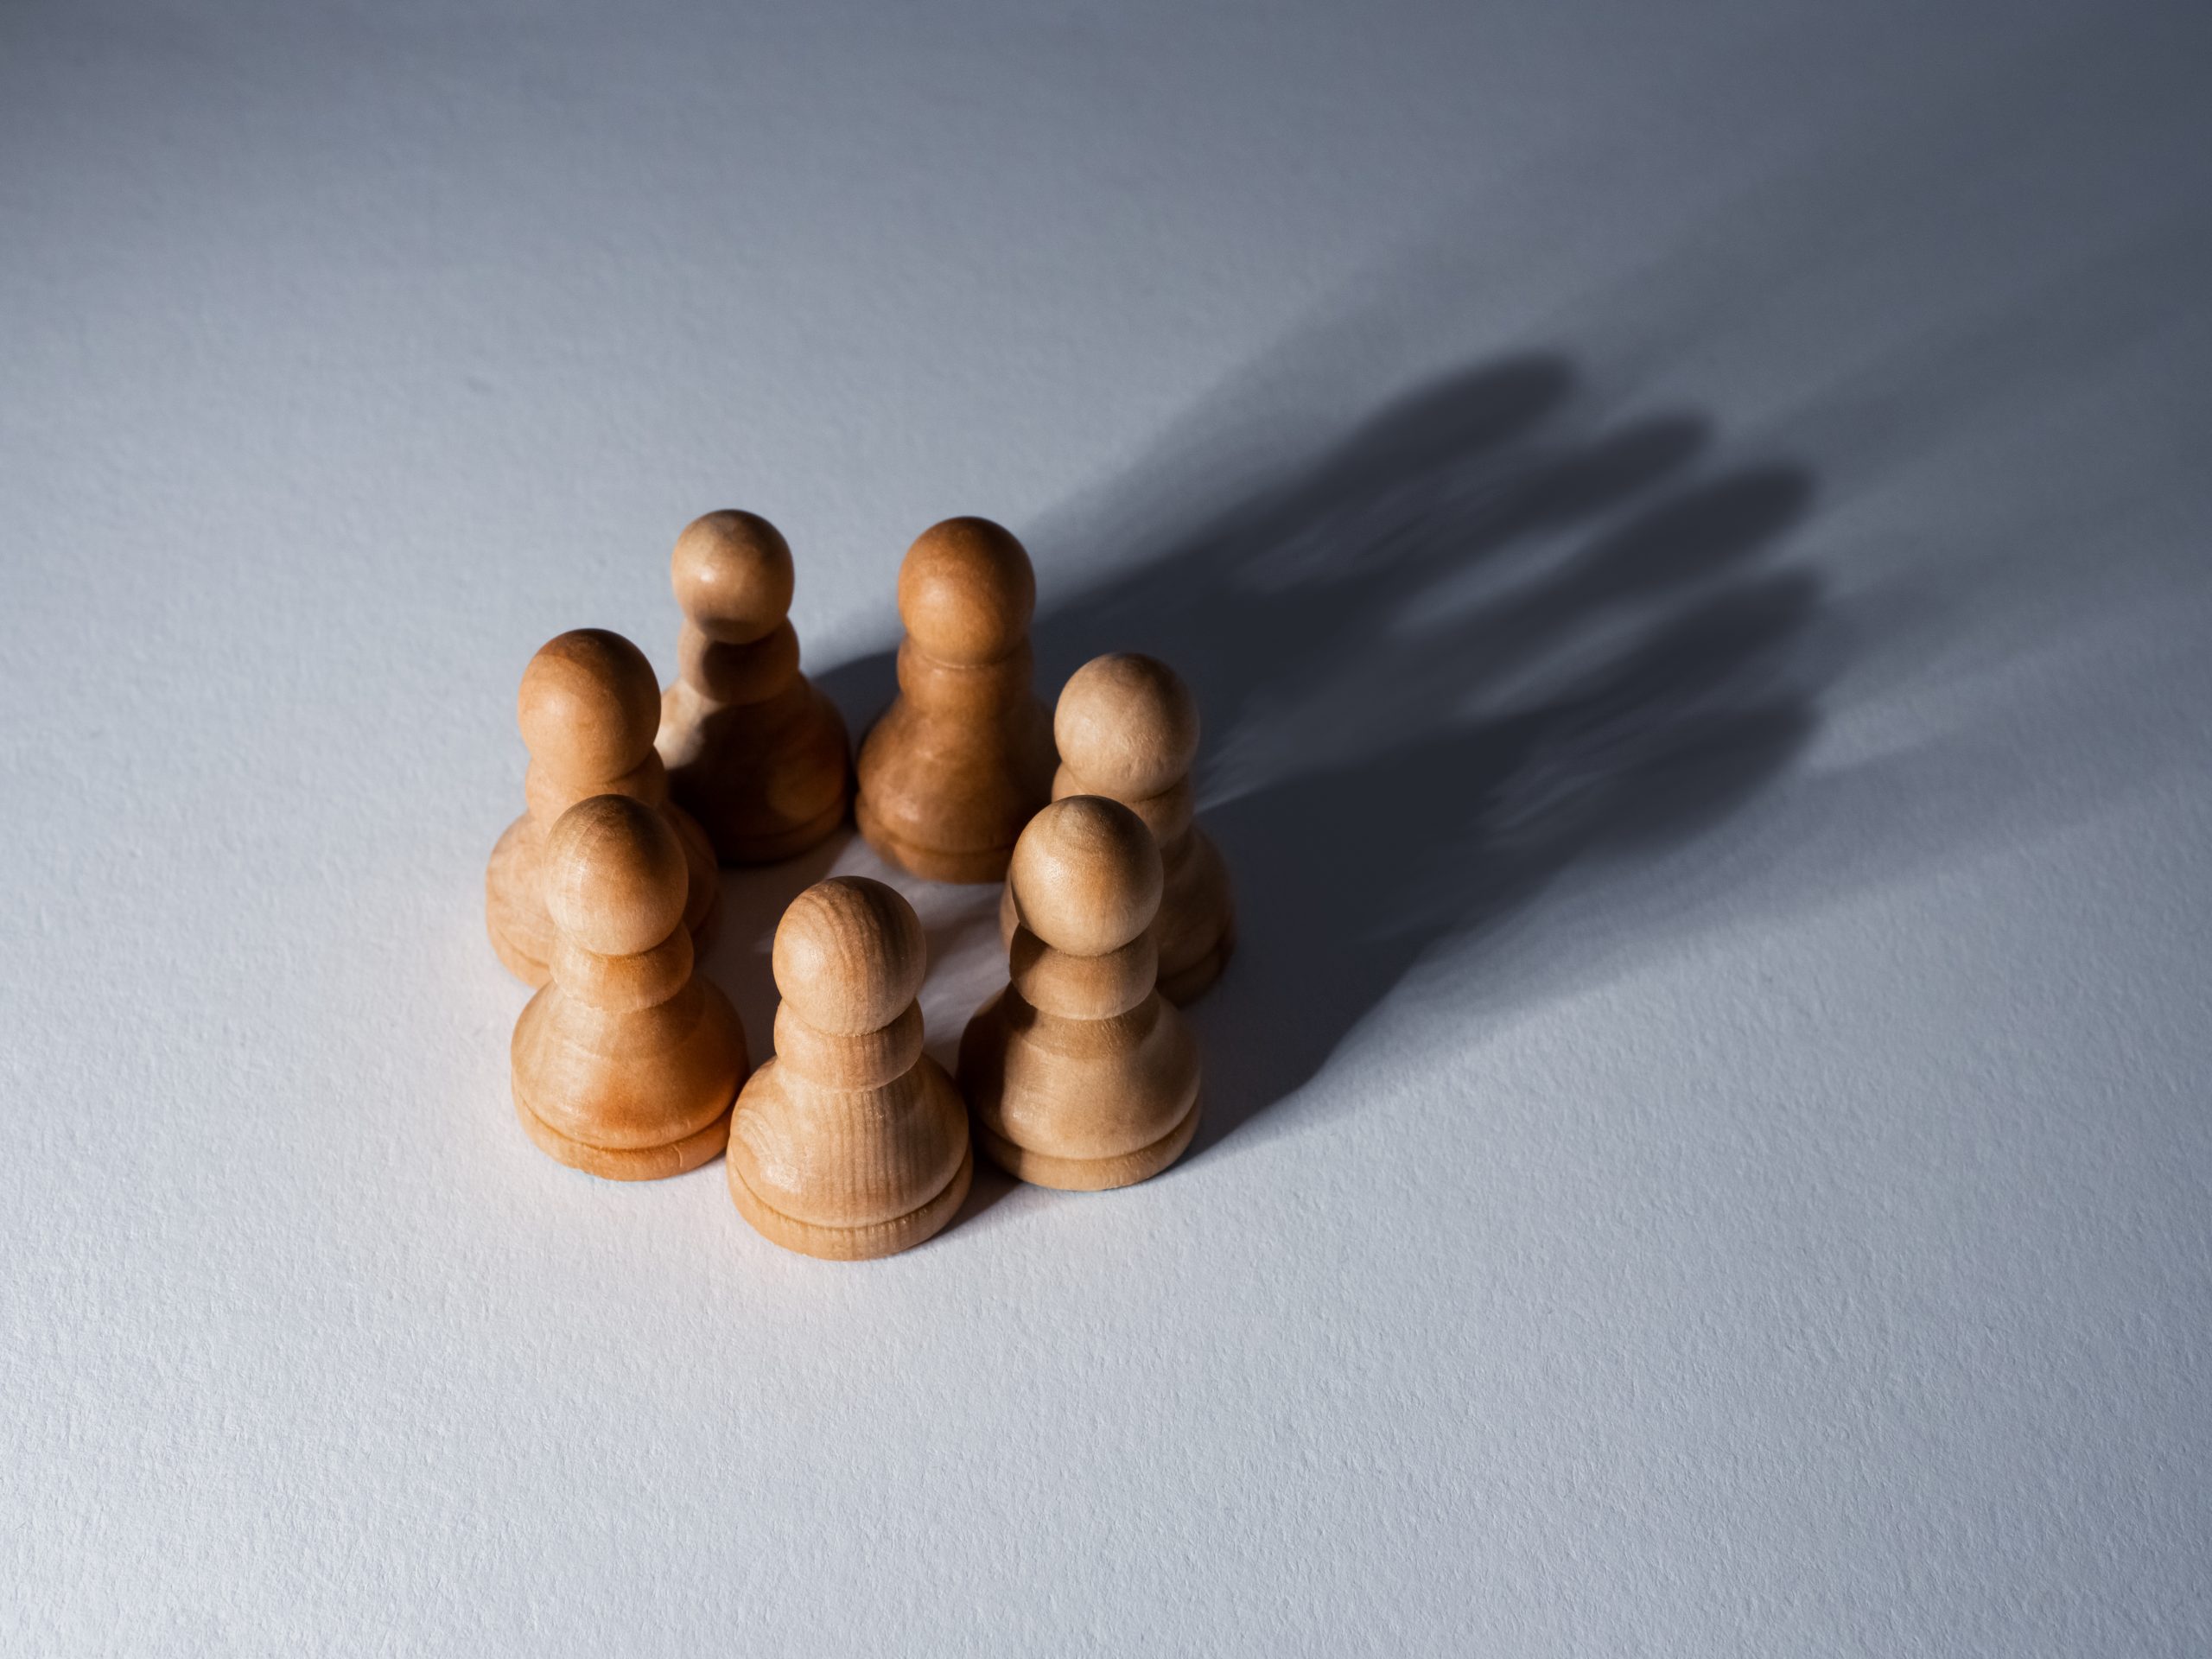 Overlooking the Value of Your Pawns